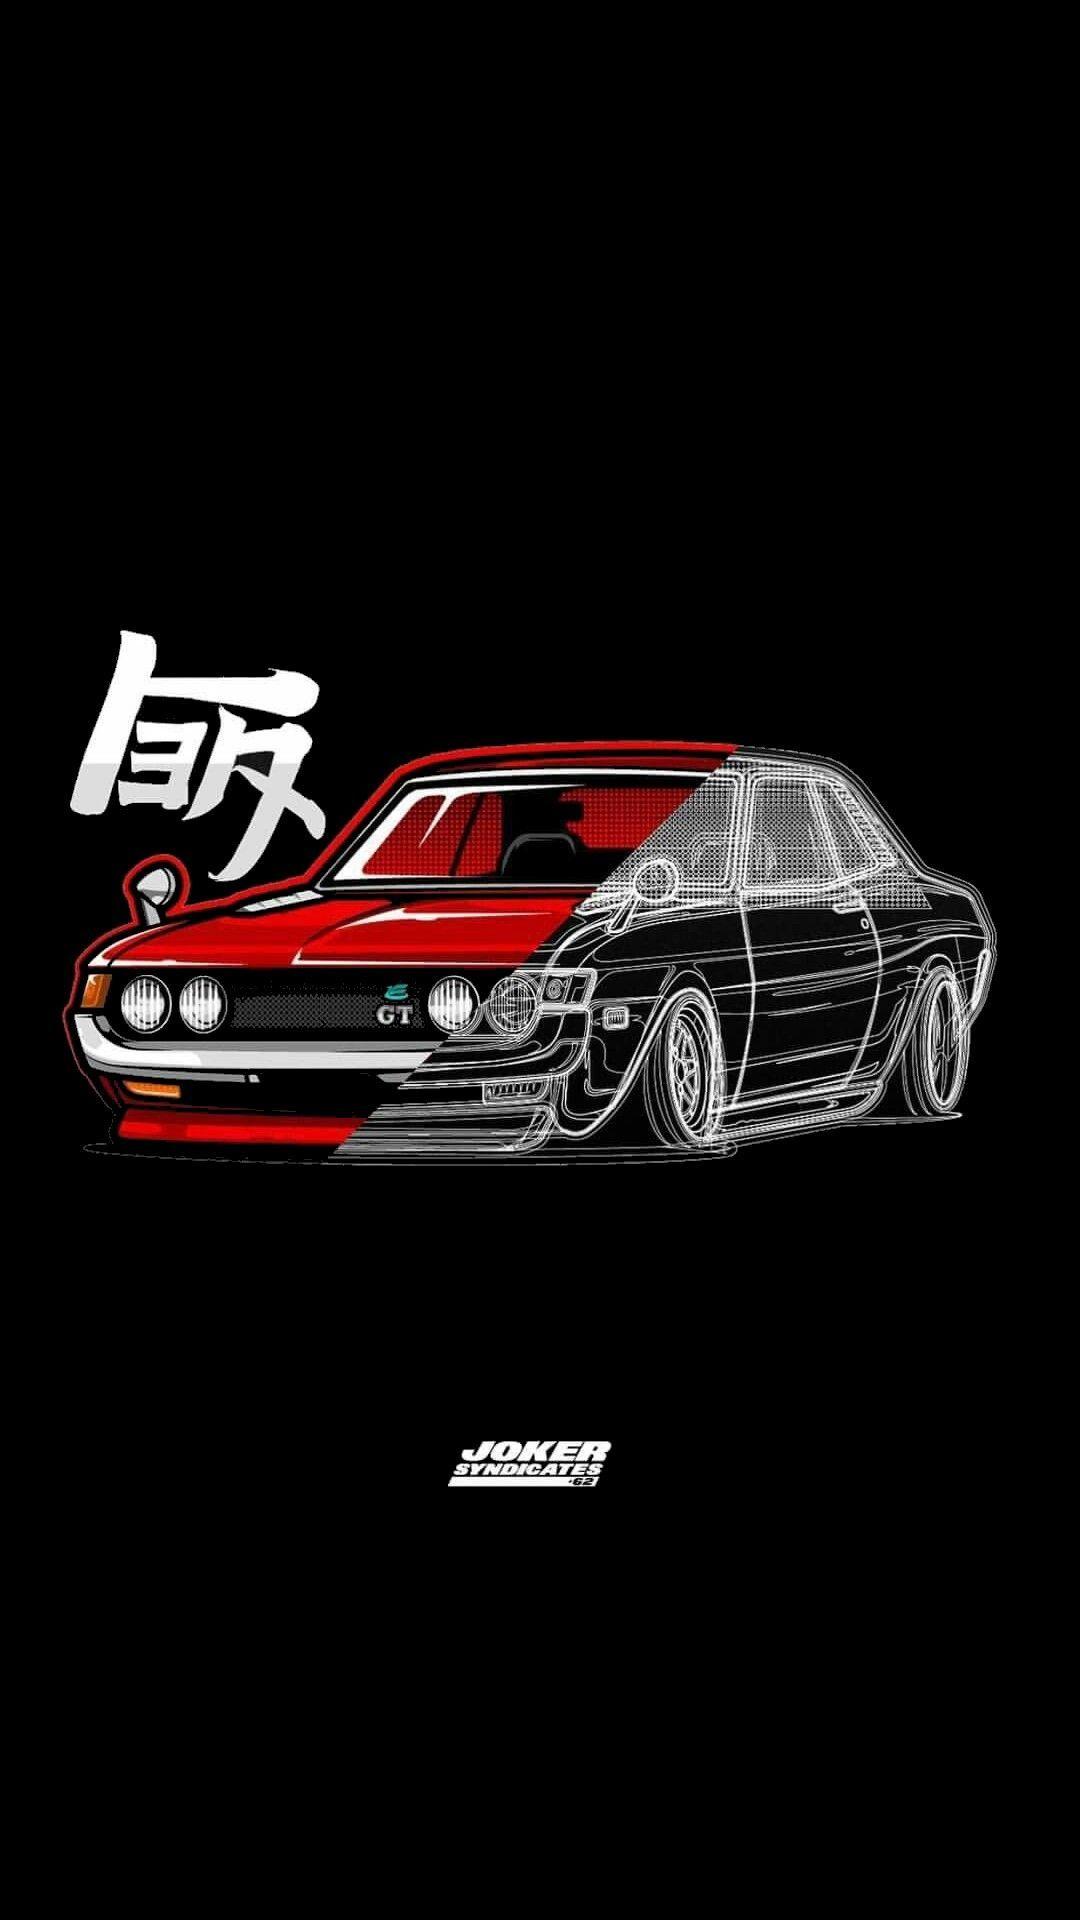 Toyota Jdm Wallpapers Top Free Toyota Jdm Backgrounds Wallpaperaccess